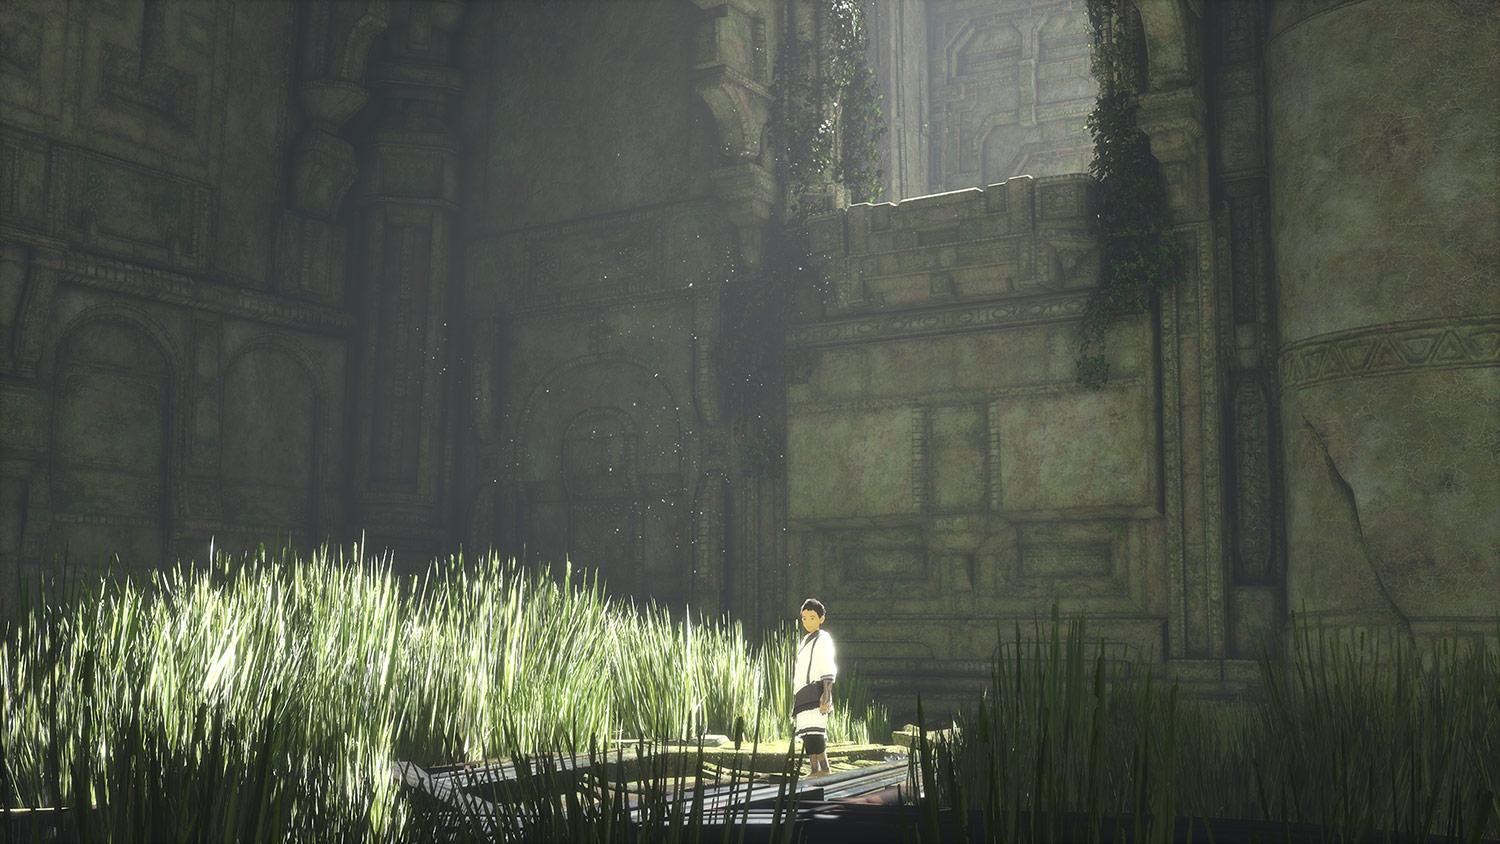 The Last Guardian: New Gameplay Details, 2016 Release Confirmed - IGN